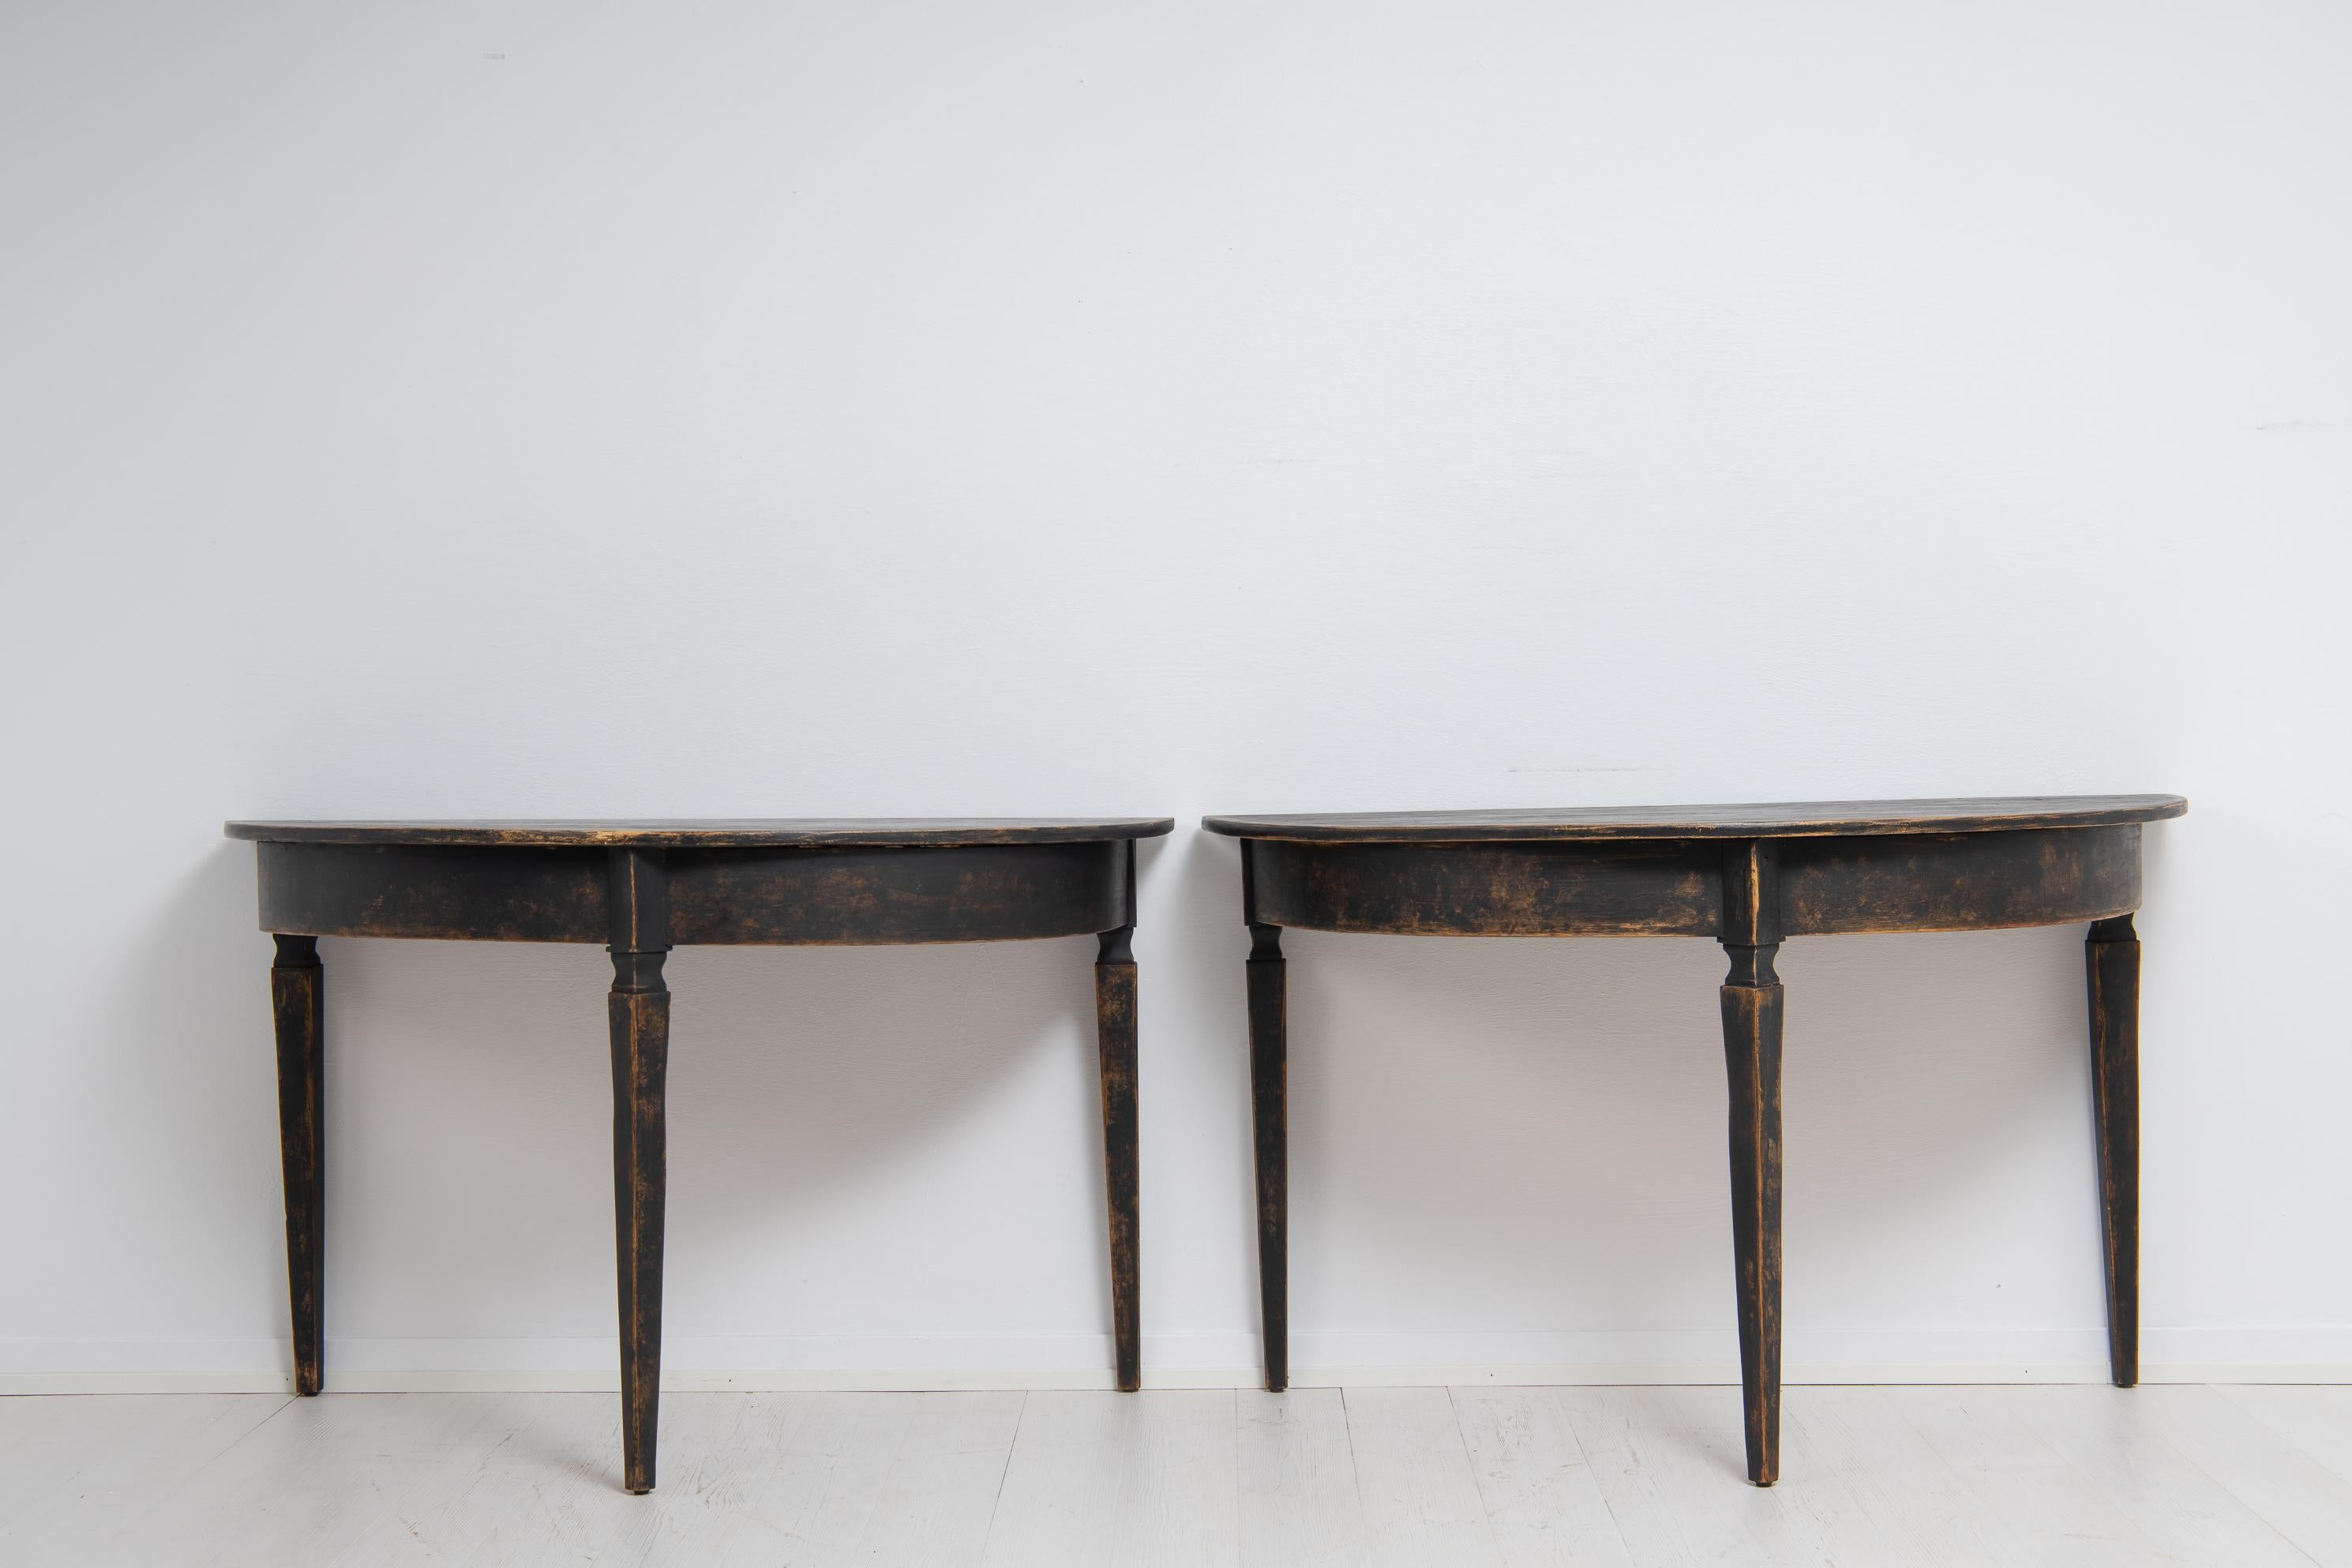 Pair of black demi lune tables from northern Sweden made during the mid 19th century. The tables are from around 1860 and has black distressed paint. The tables have minimal adornments for a very clean and minimalistic look. The paint gives it